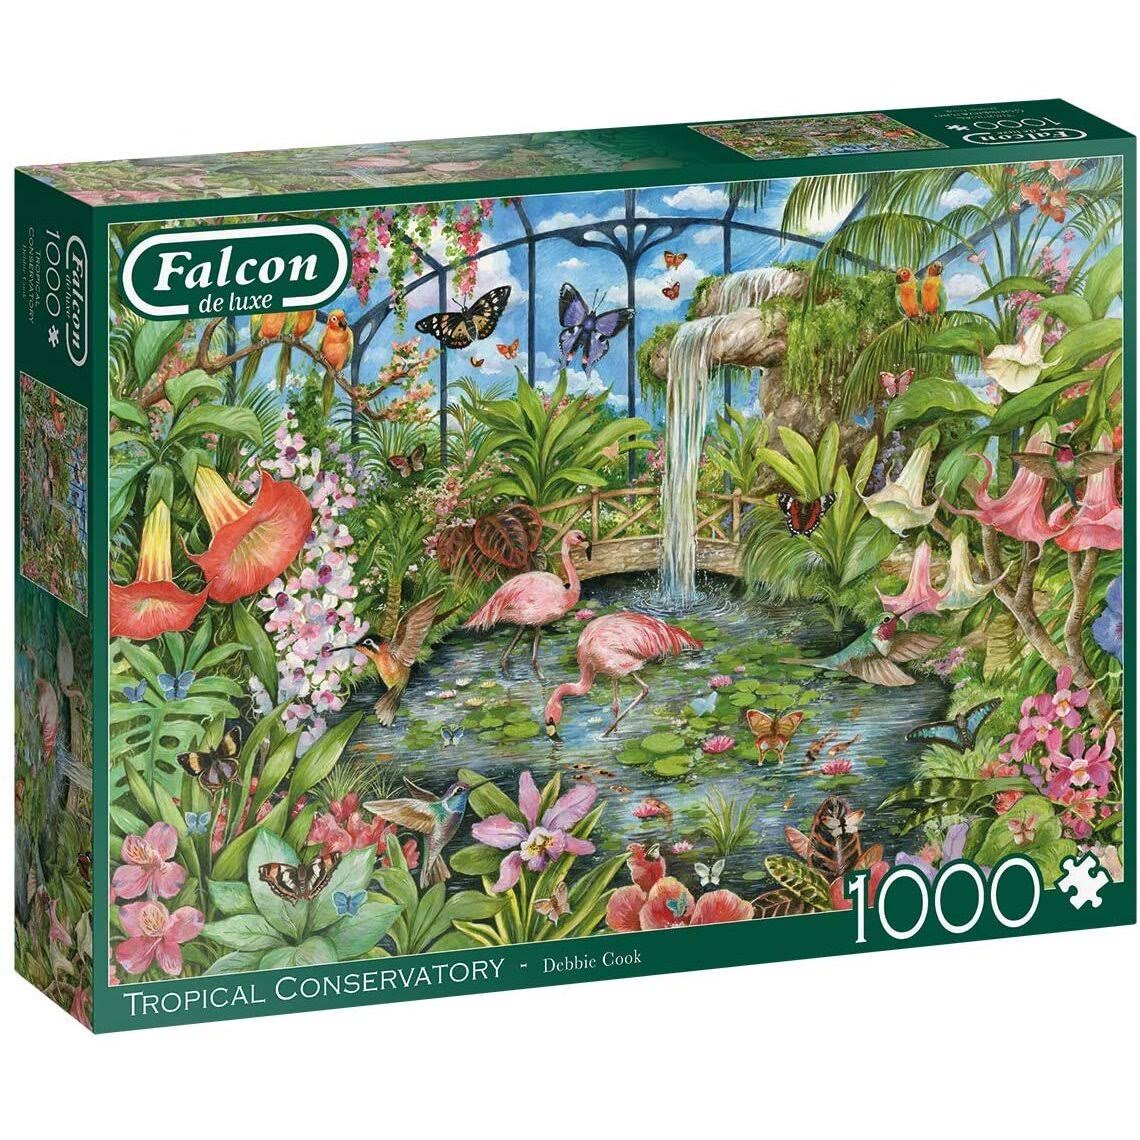 NEW Falcon de luxe Country Conservatory 1000 piece jigsaw puzzle 